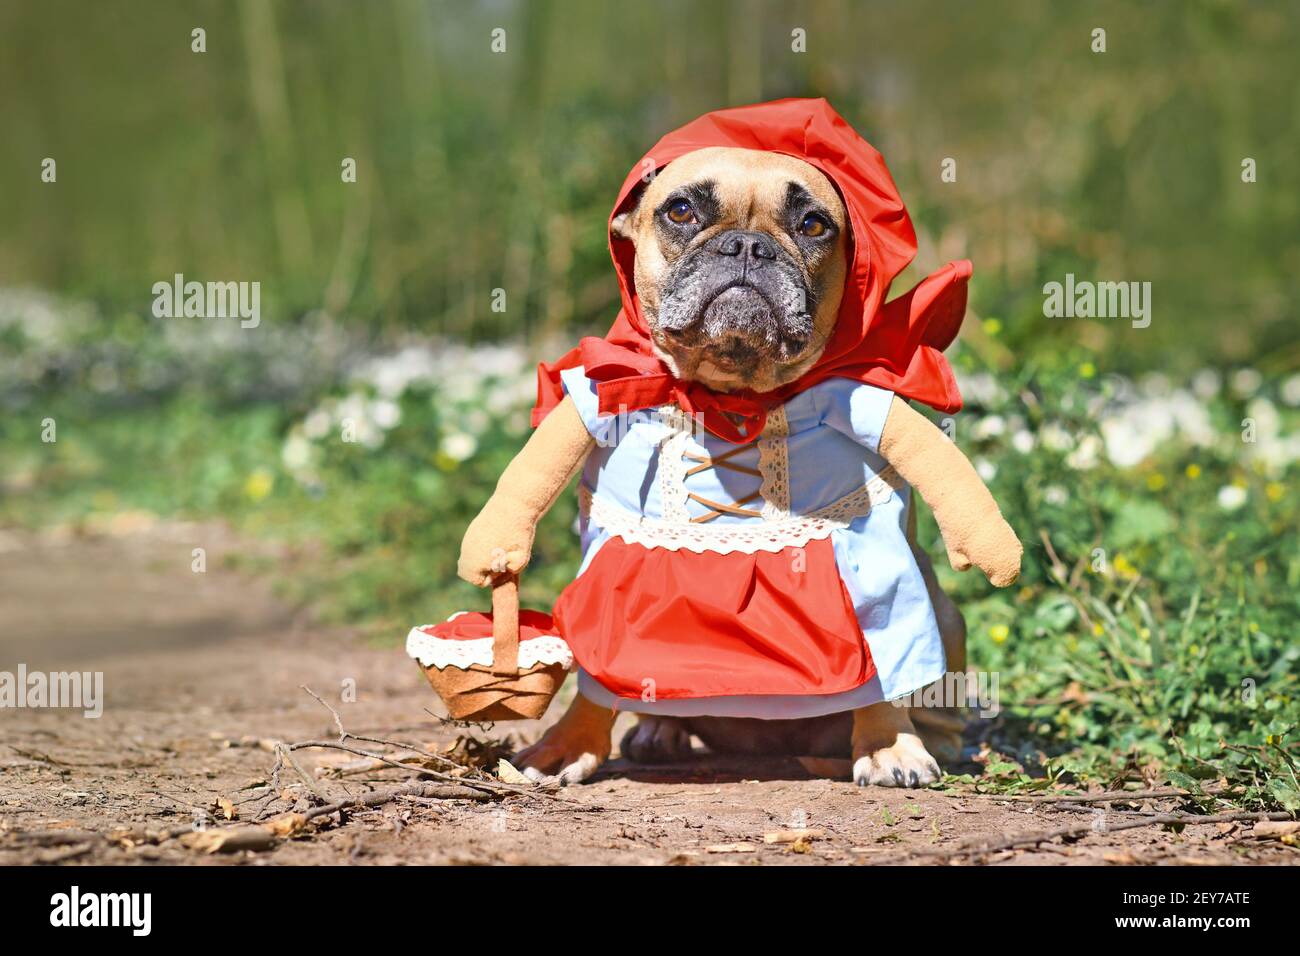 Funny French Bulldog dos dressed up as fairytale character Little Red Riding Hood with full body costumes with fake arms wearing basket in forest Stock Photo